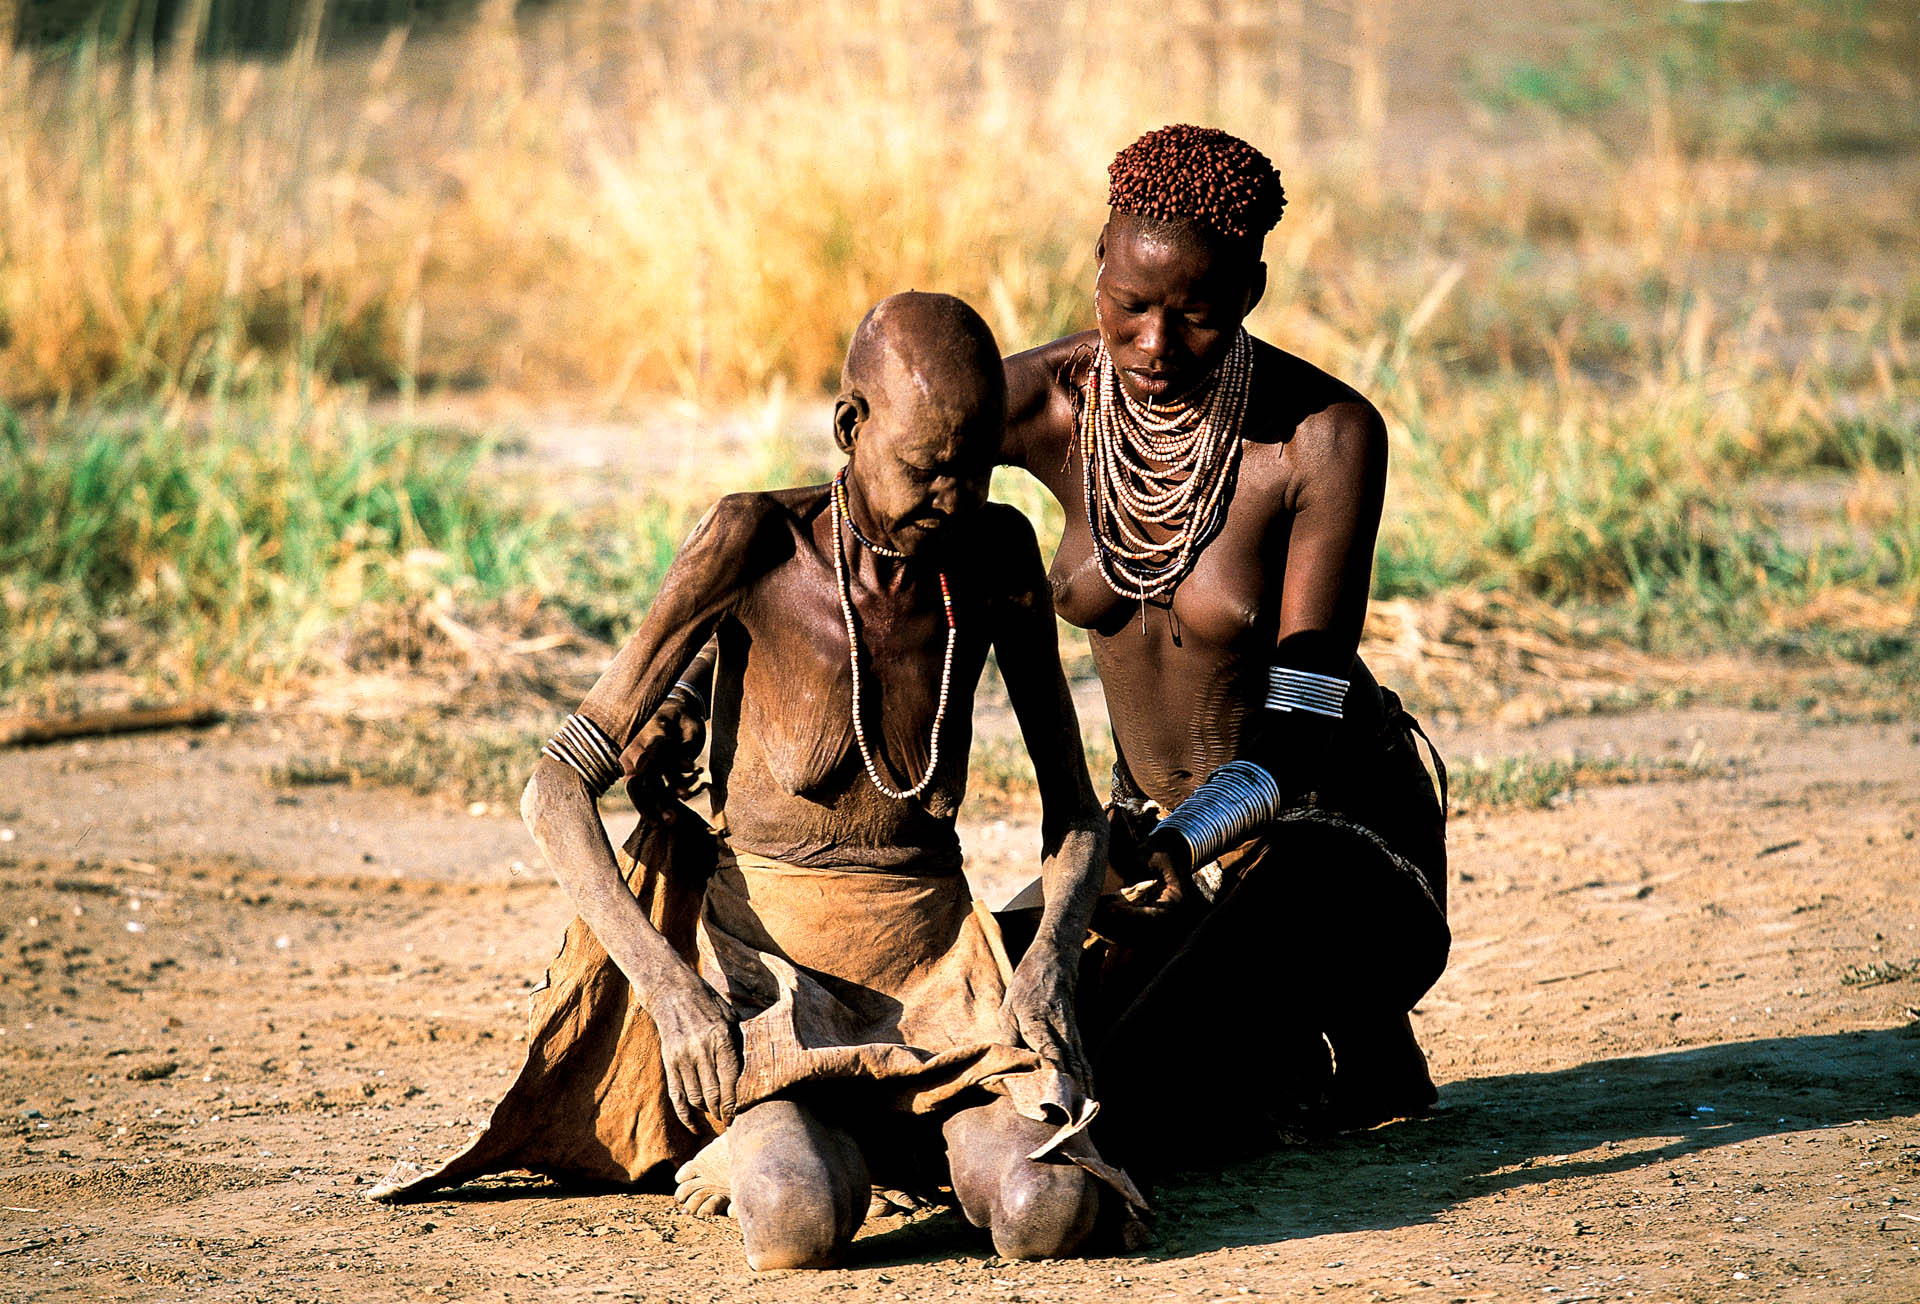  Karo region: the young women are usually entrusted with caring for the elderly members of their group. 